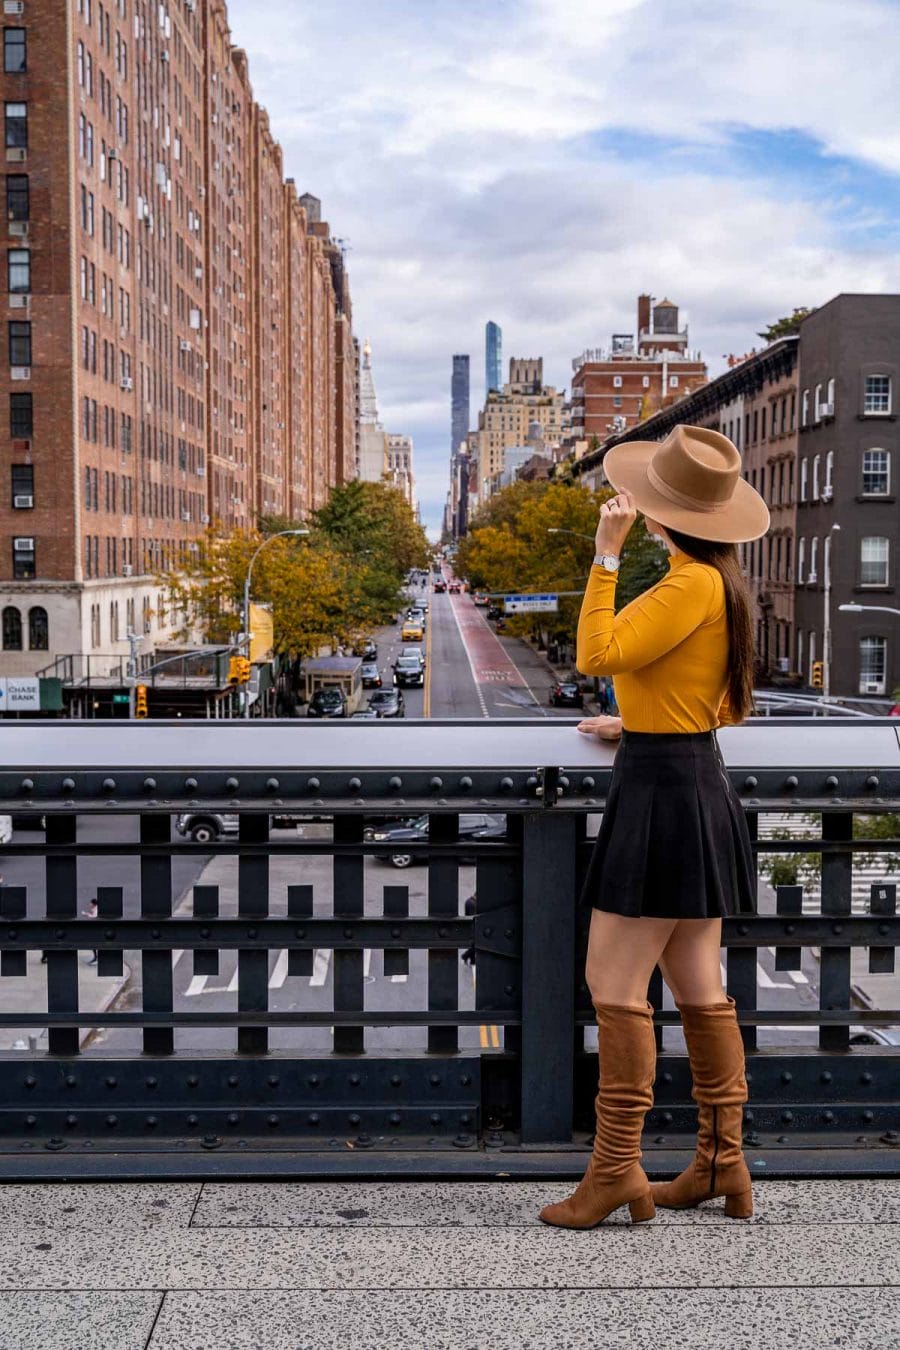 Girl on the High Line in New York, overlooking Hudson Yards